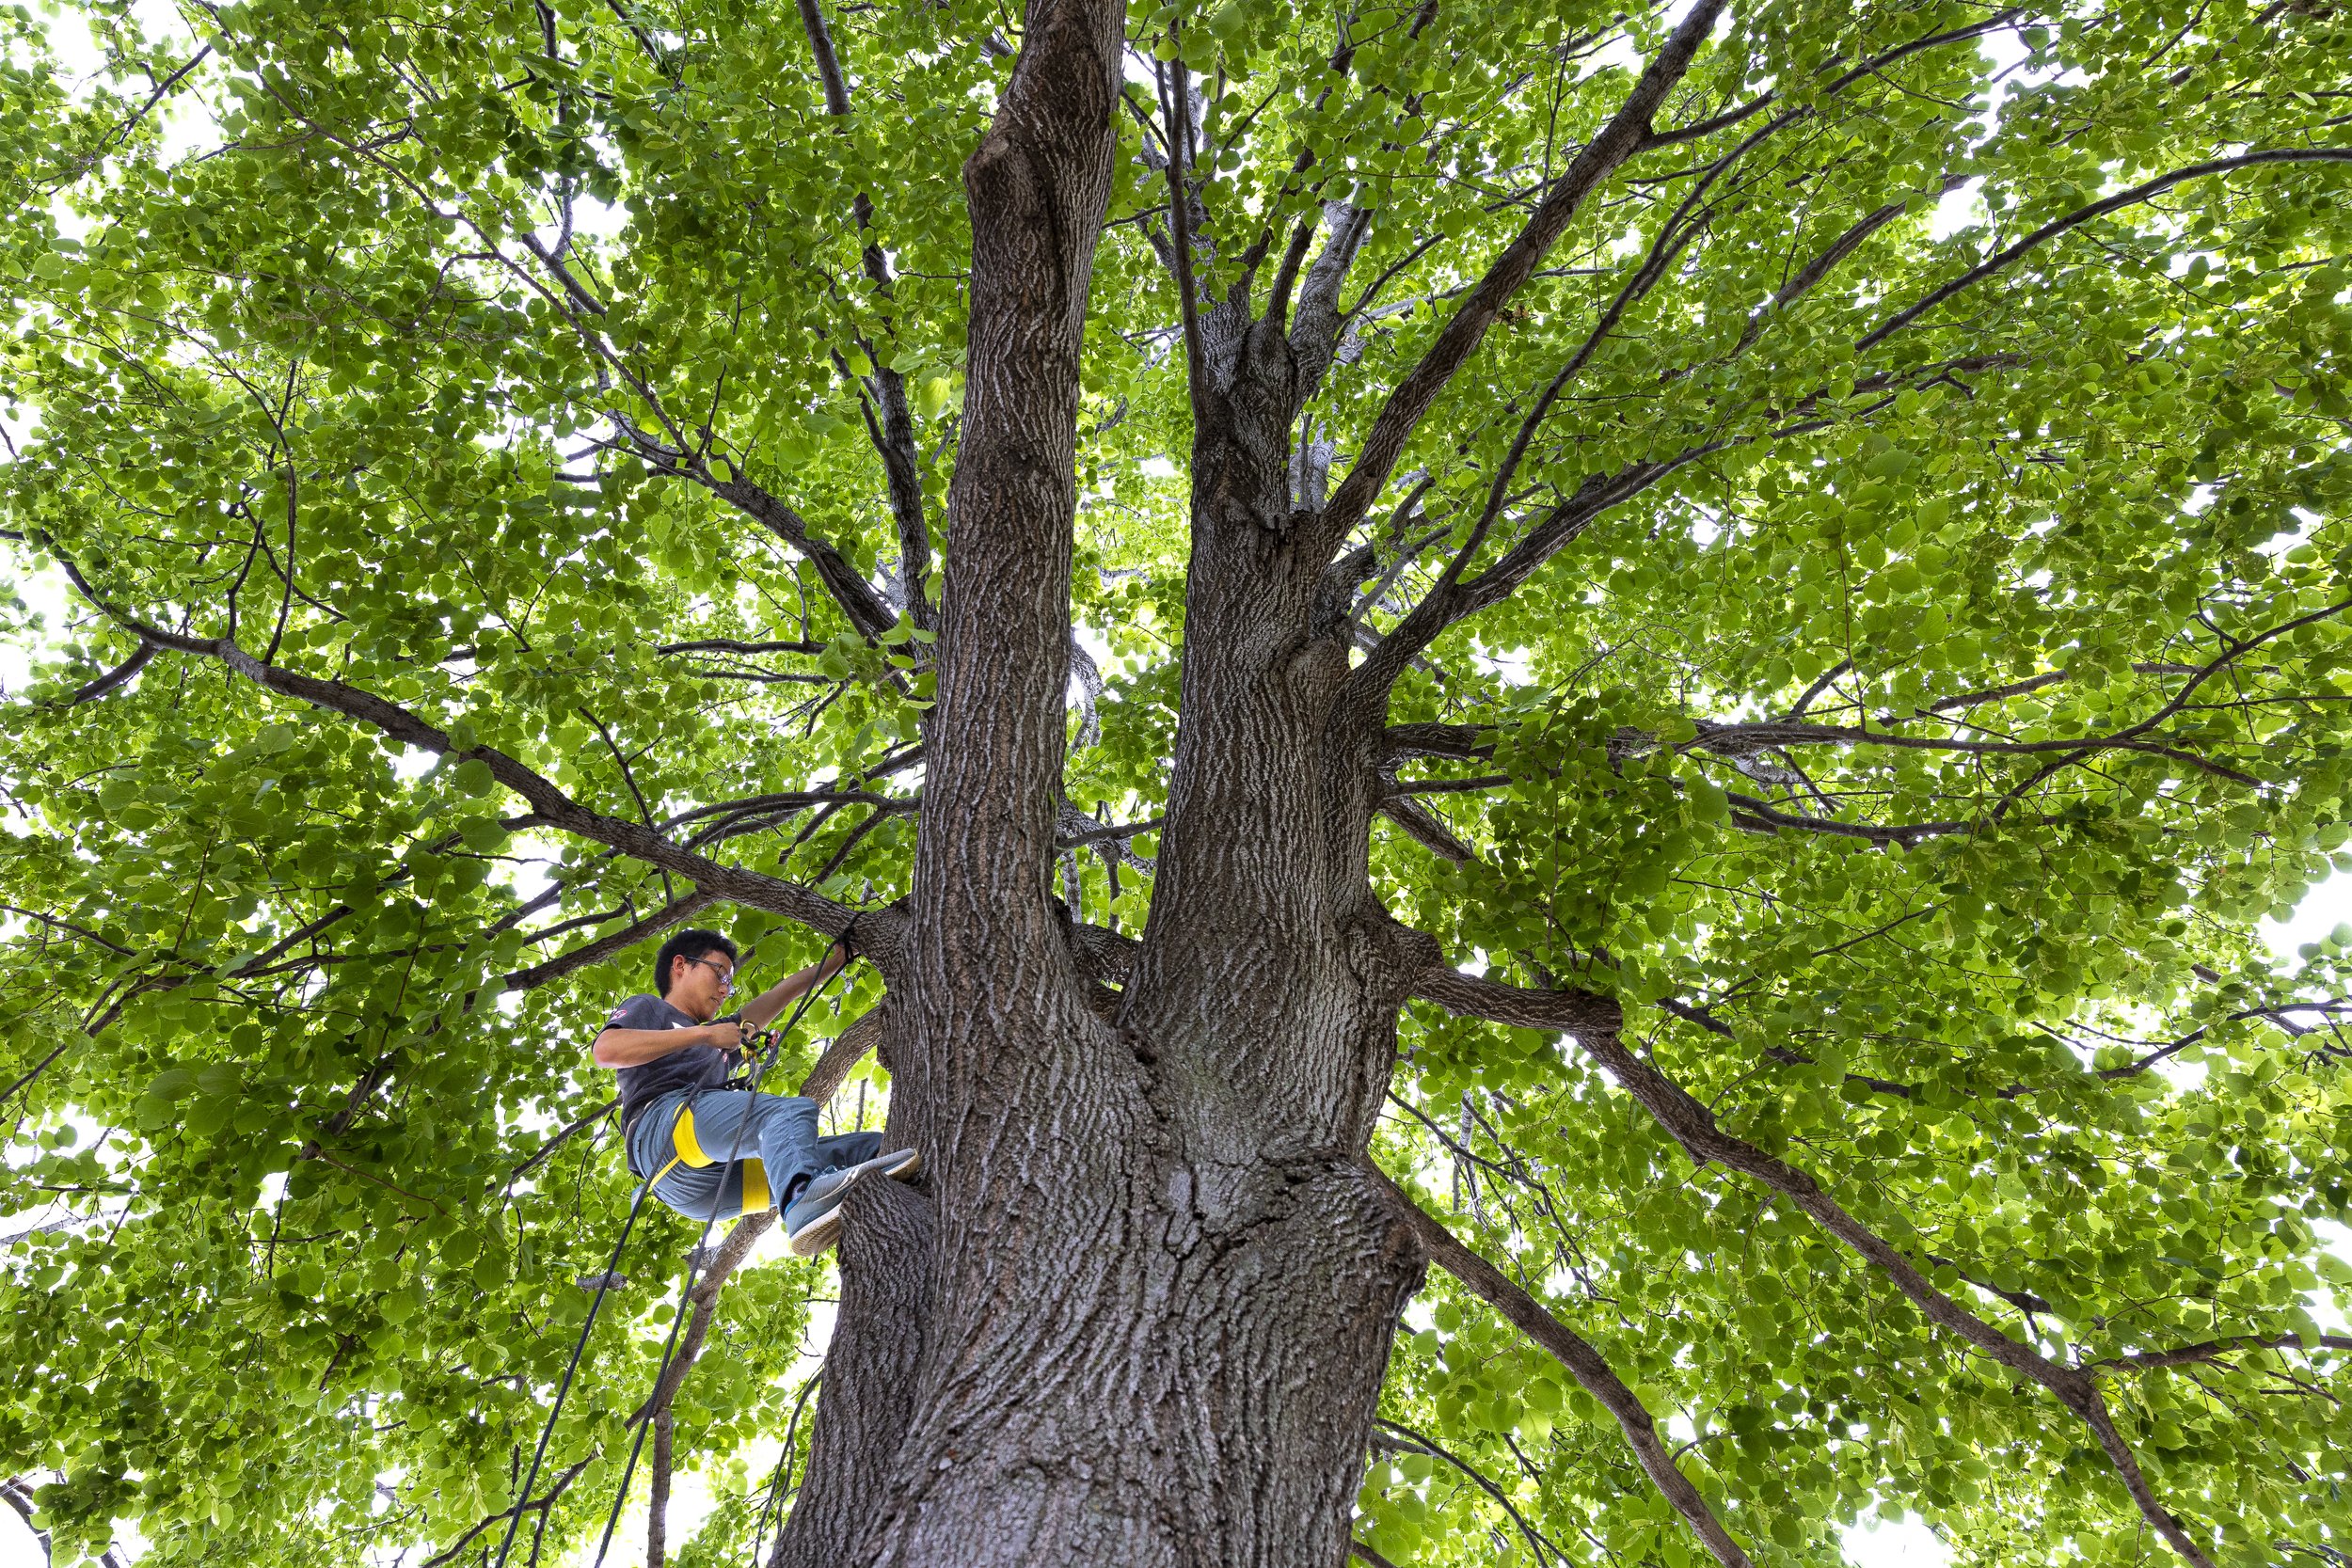  David Campbell, a recent graduate from Union college's international rescue and relief program, climbs and repels from a tree alongside Mike Mikler (not pictured) on Wednesday, June 21, 2023, at Holmes Lake Park in Lincoln. 